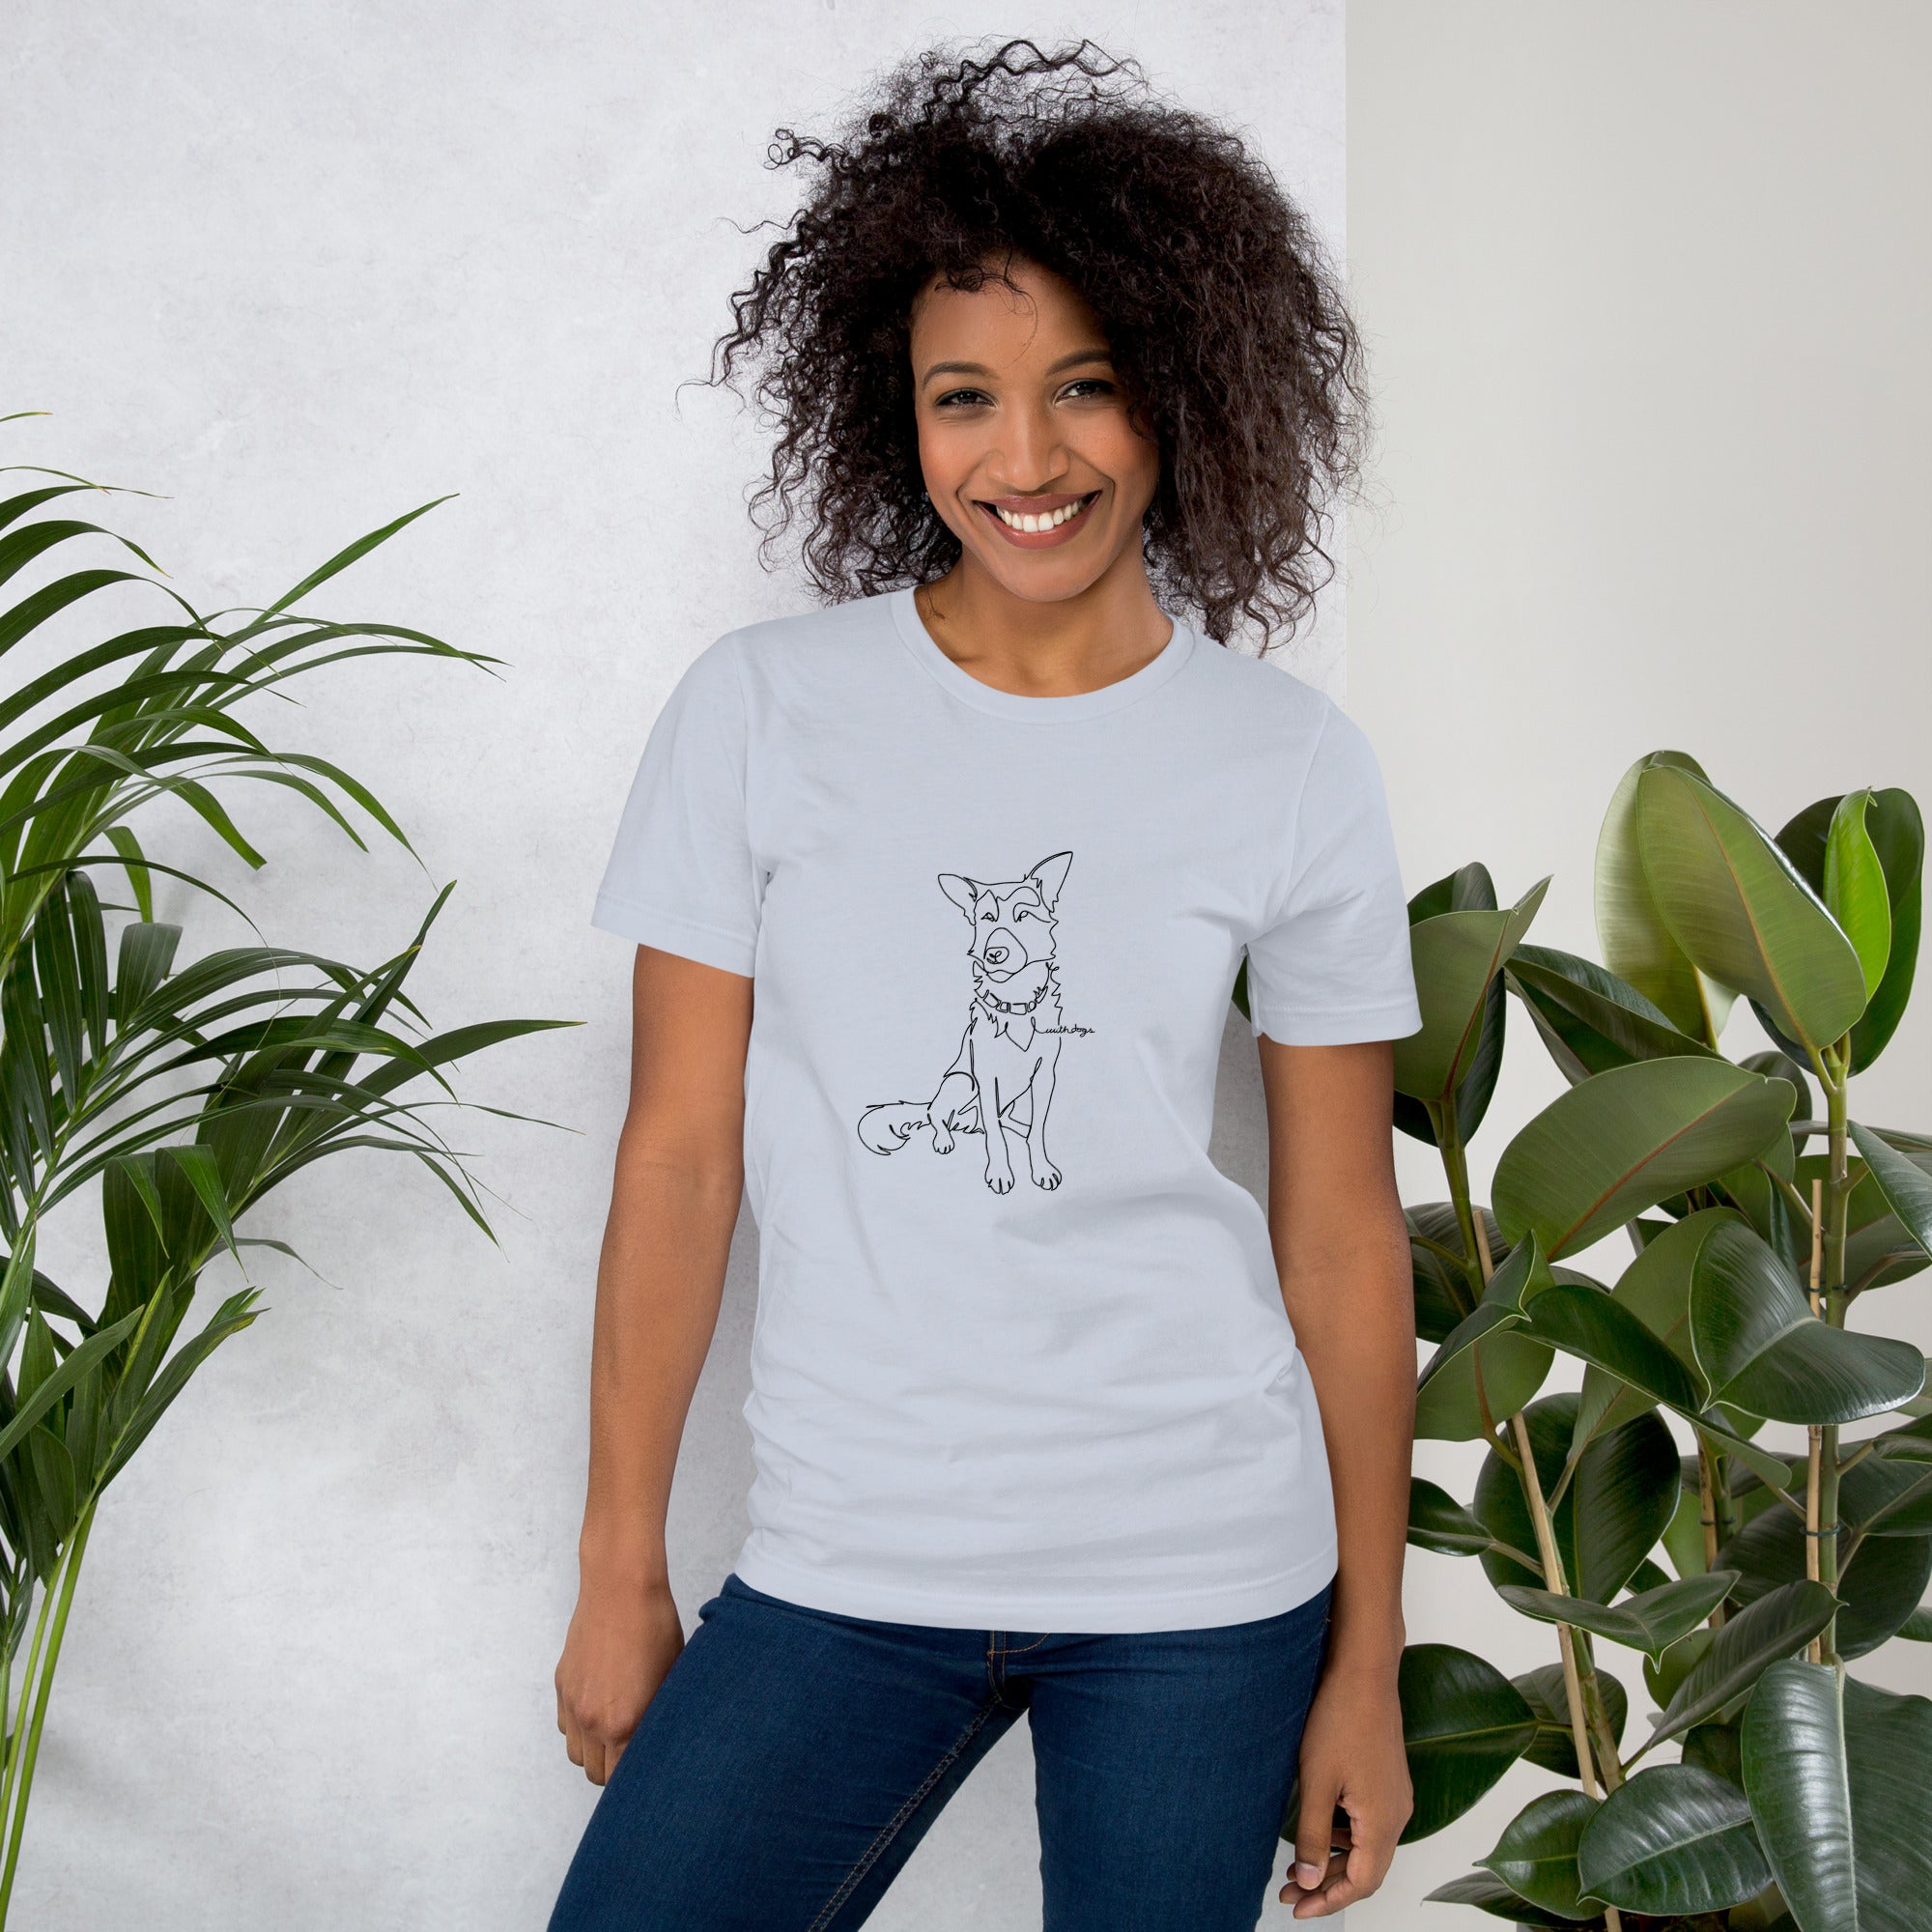 Sitting With Dogs [WANG] Unisex t-shirt light